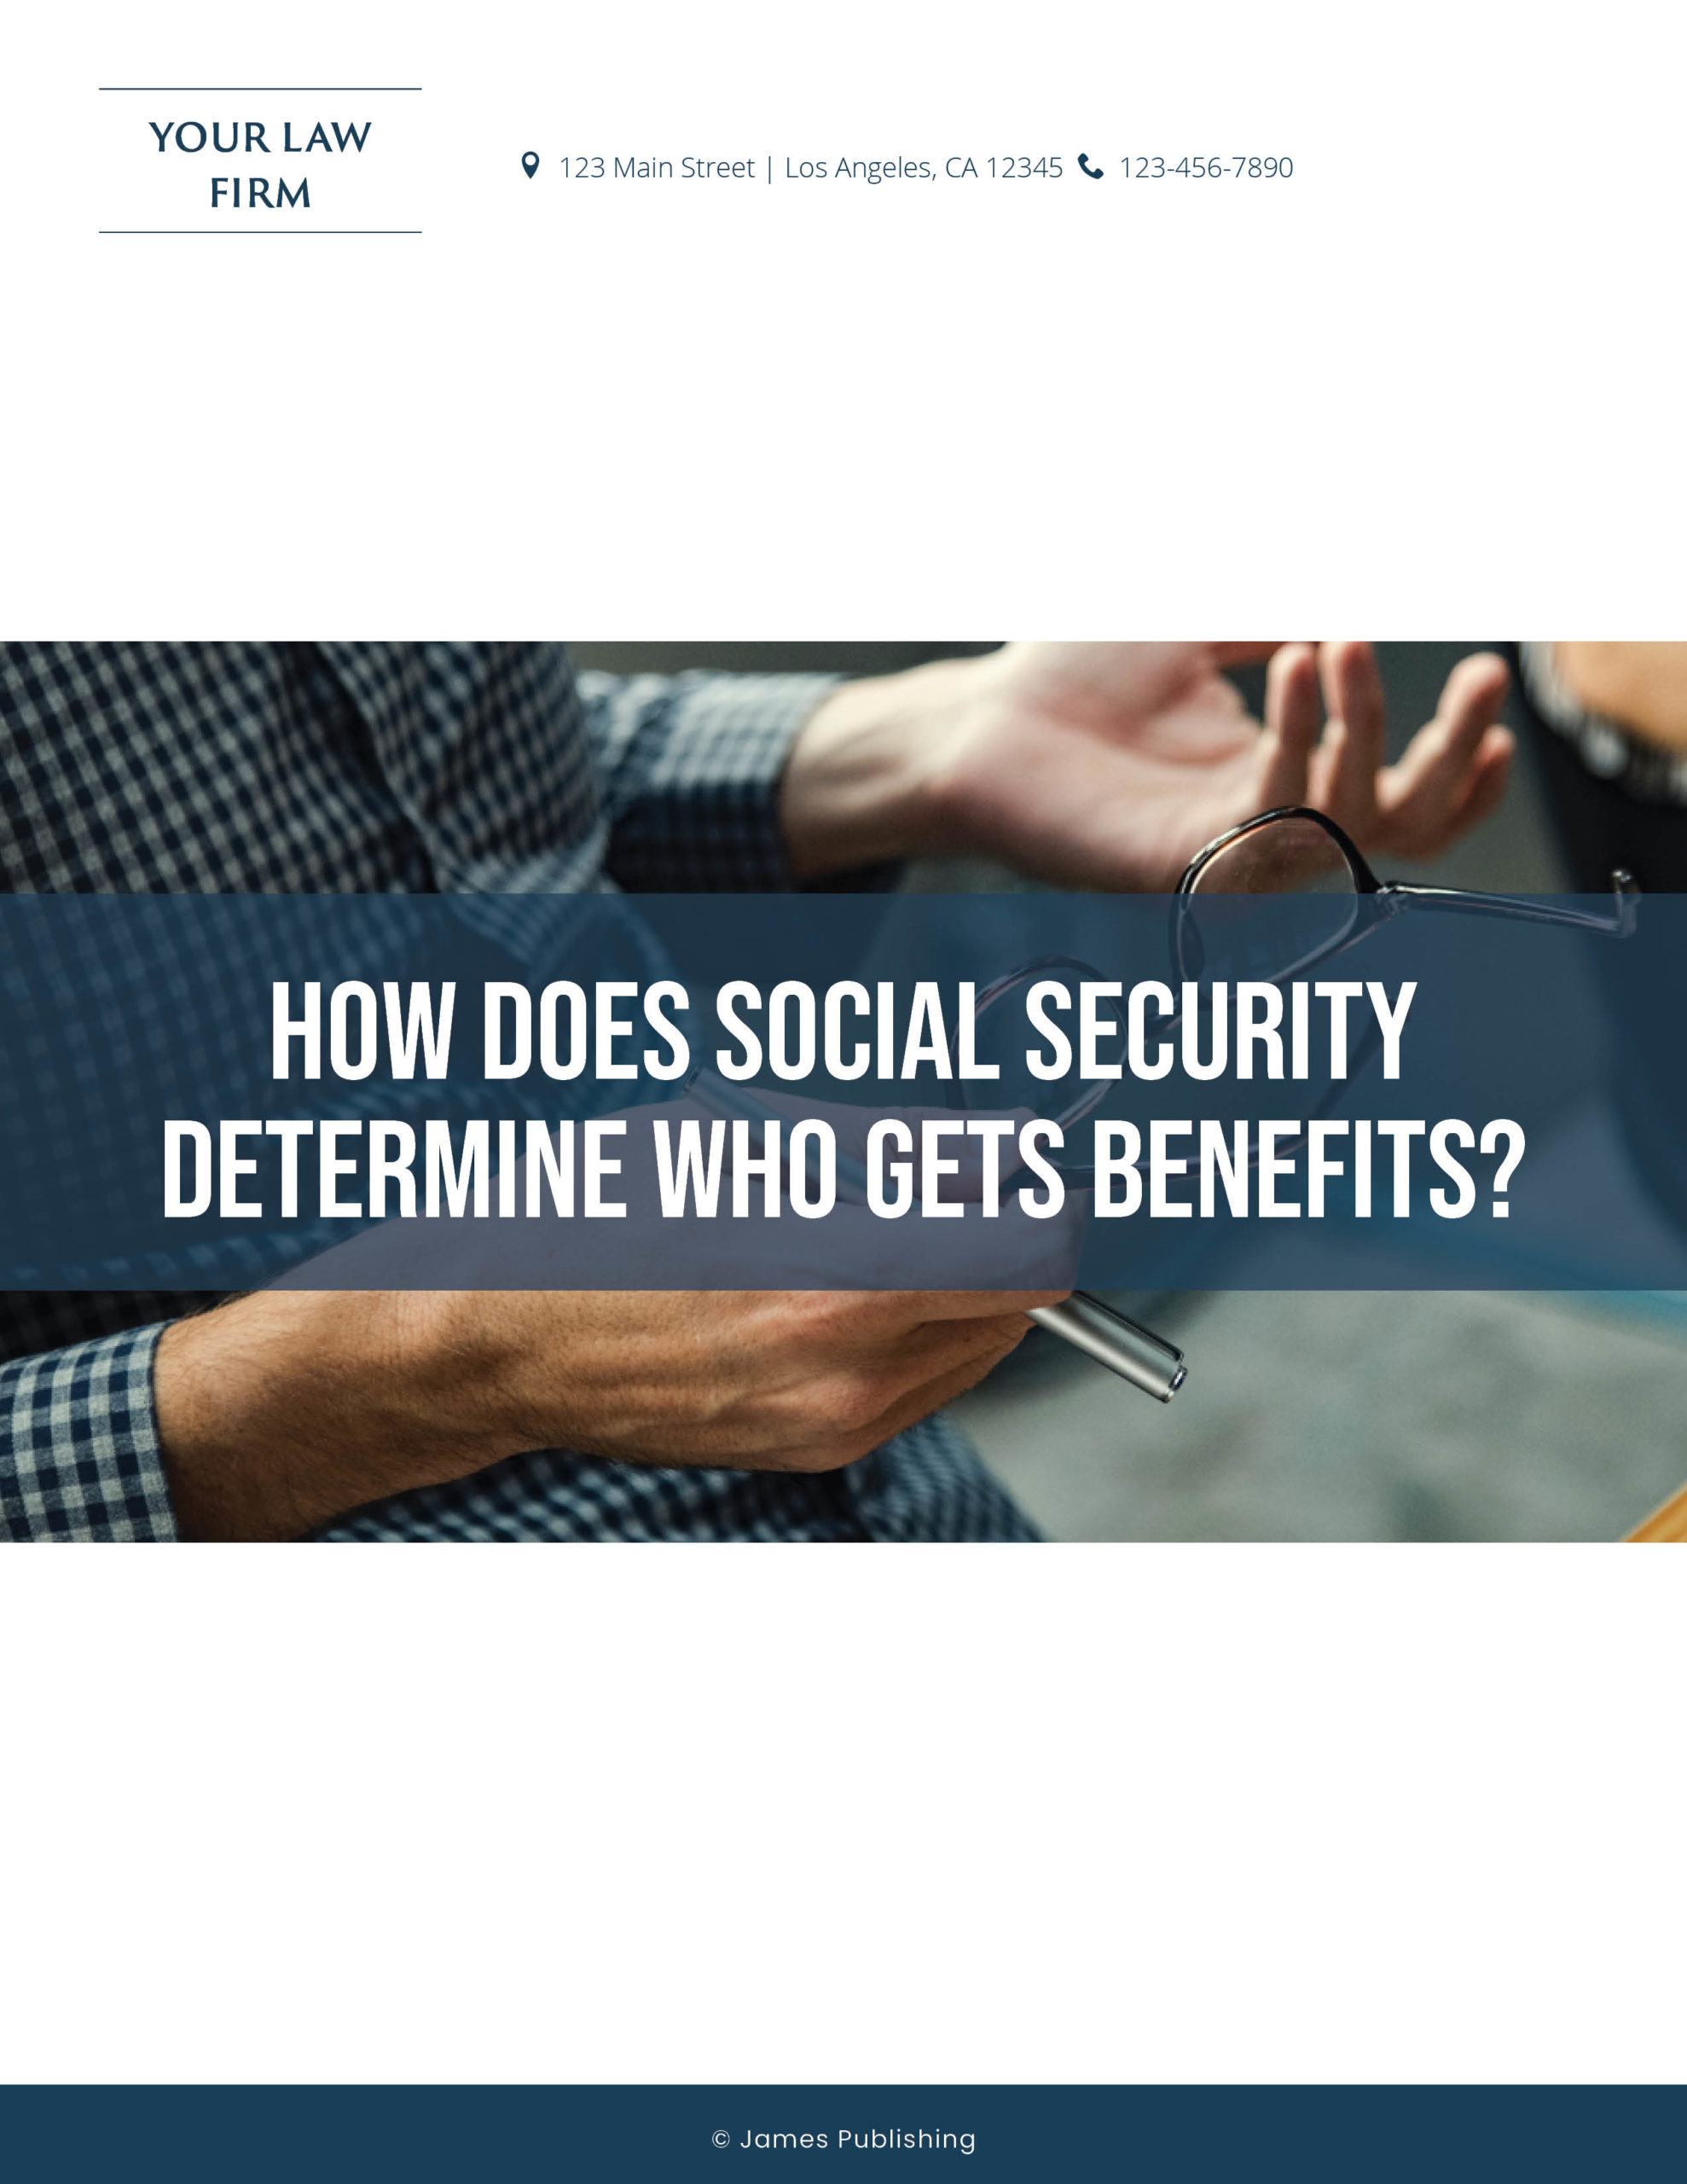 SSD-15 How Does Social Security Determine Who Gets Benefits